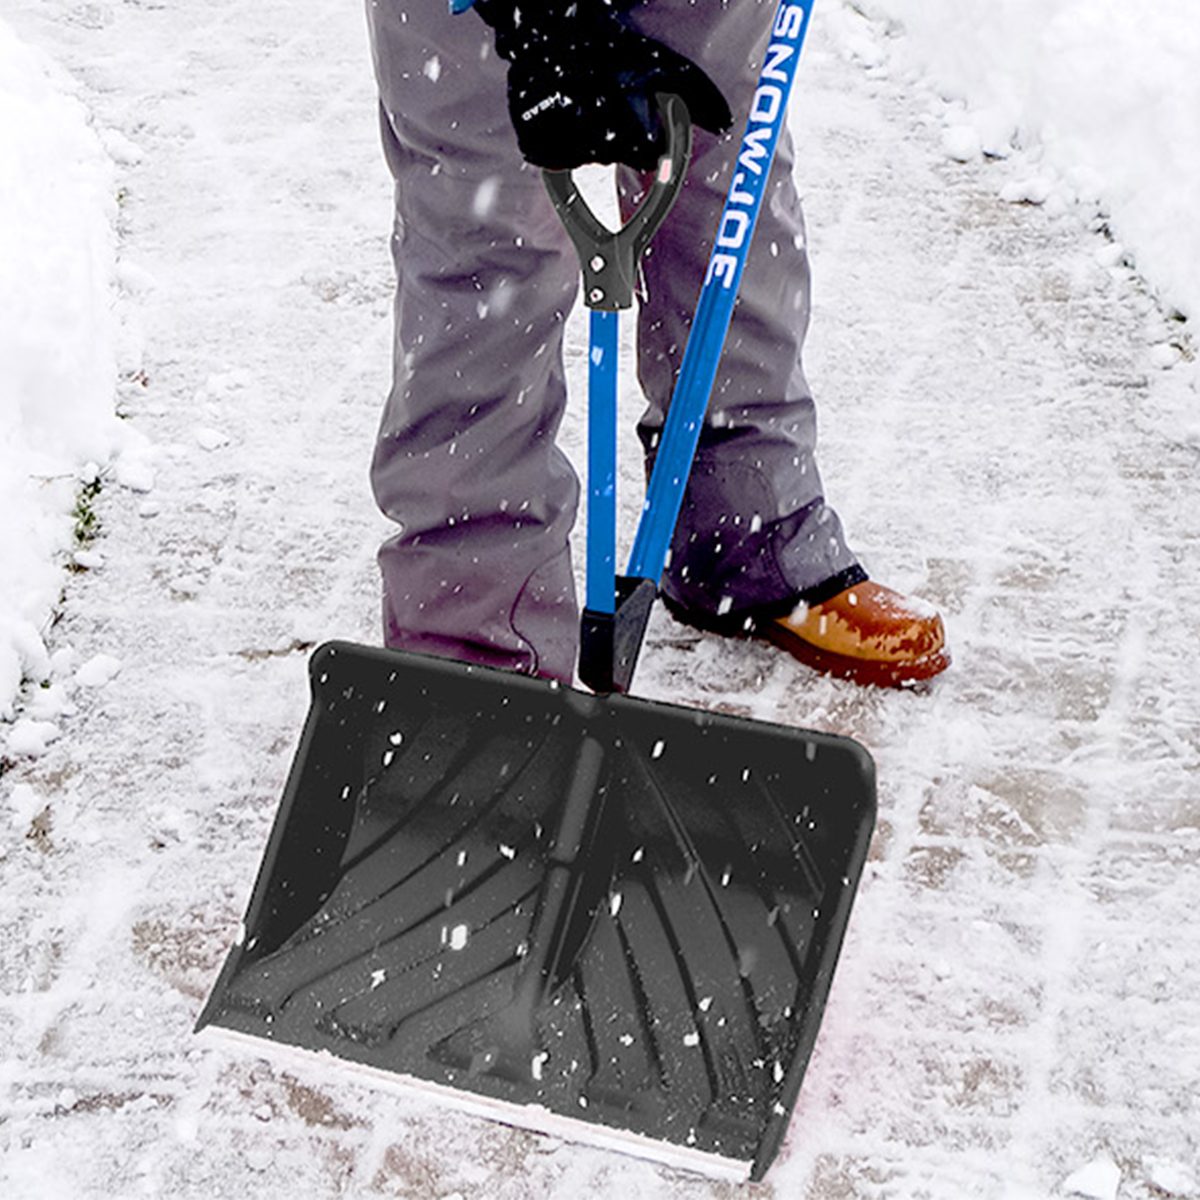 Get Ready for the Next Big Storm with These Snow Joe Sales—Save Up to 53%